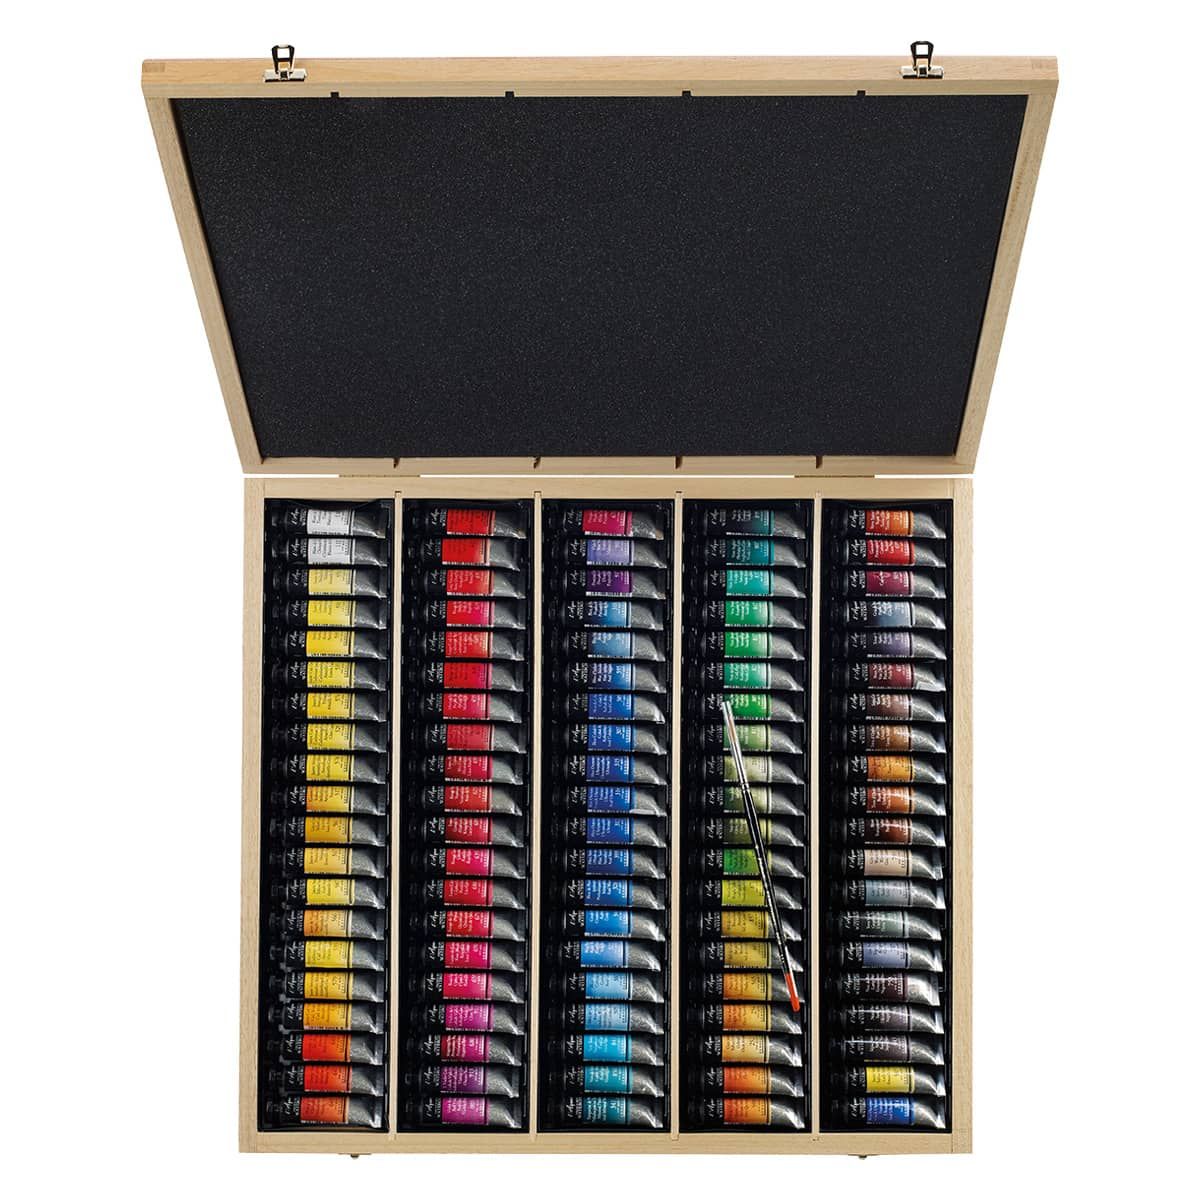 Sennelier French Artists' Watercolor Sets, 98-Color Complete Wood